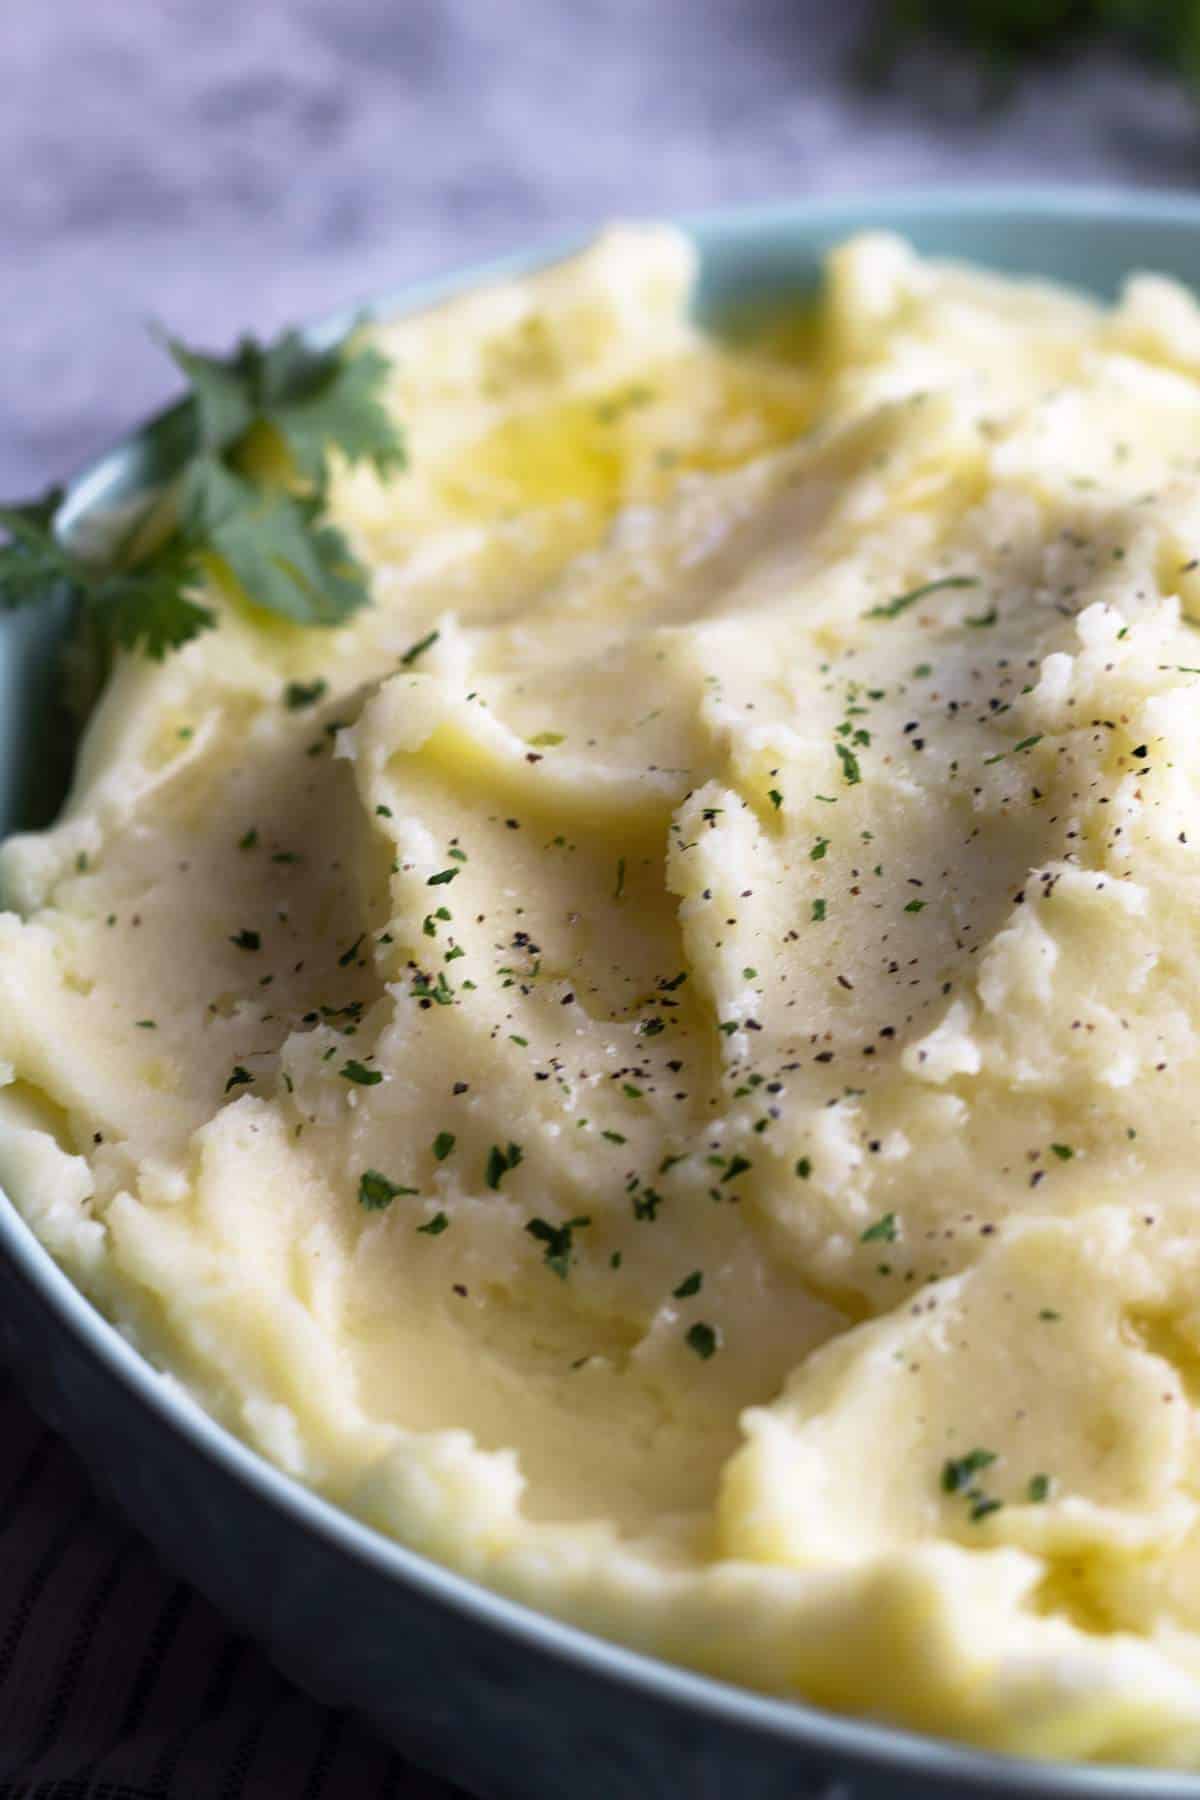 Creamy mashed potatoes in a bowl close-up shot.